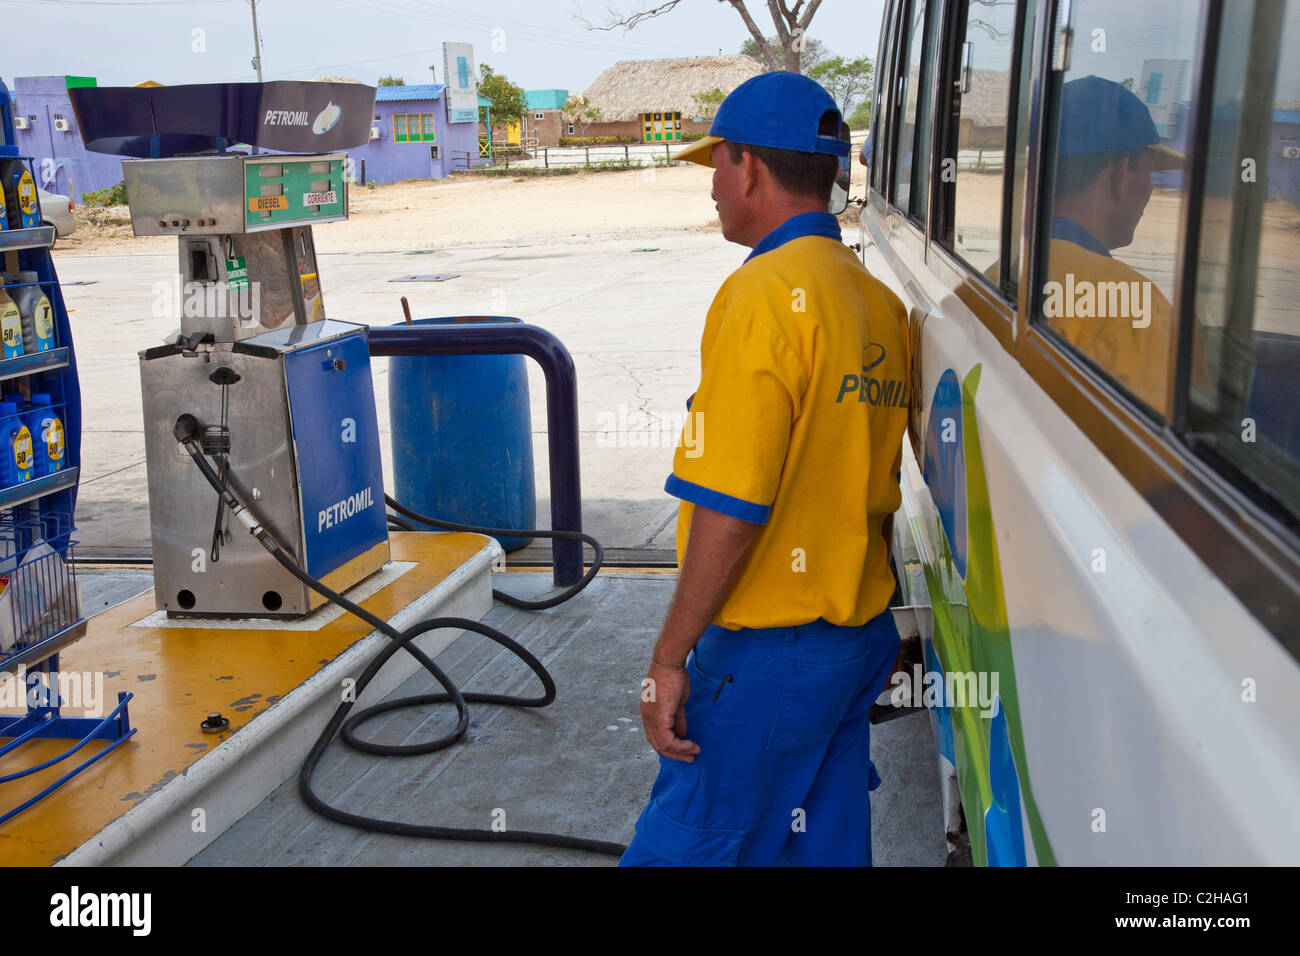 Petromil gas station in Colombia, South America Stock Photo